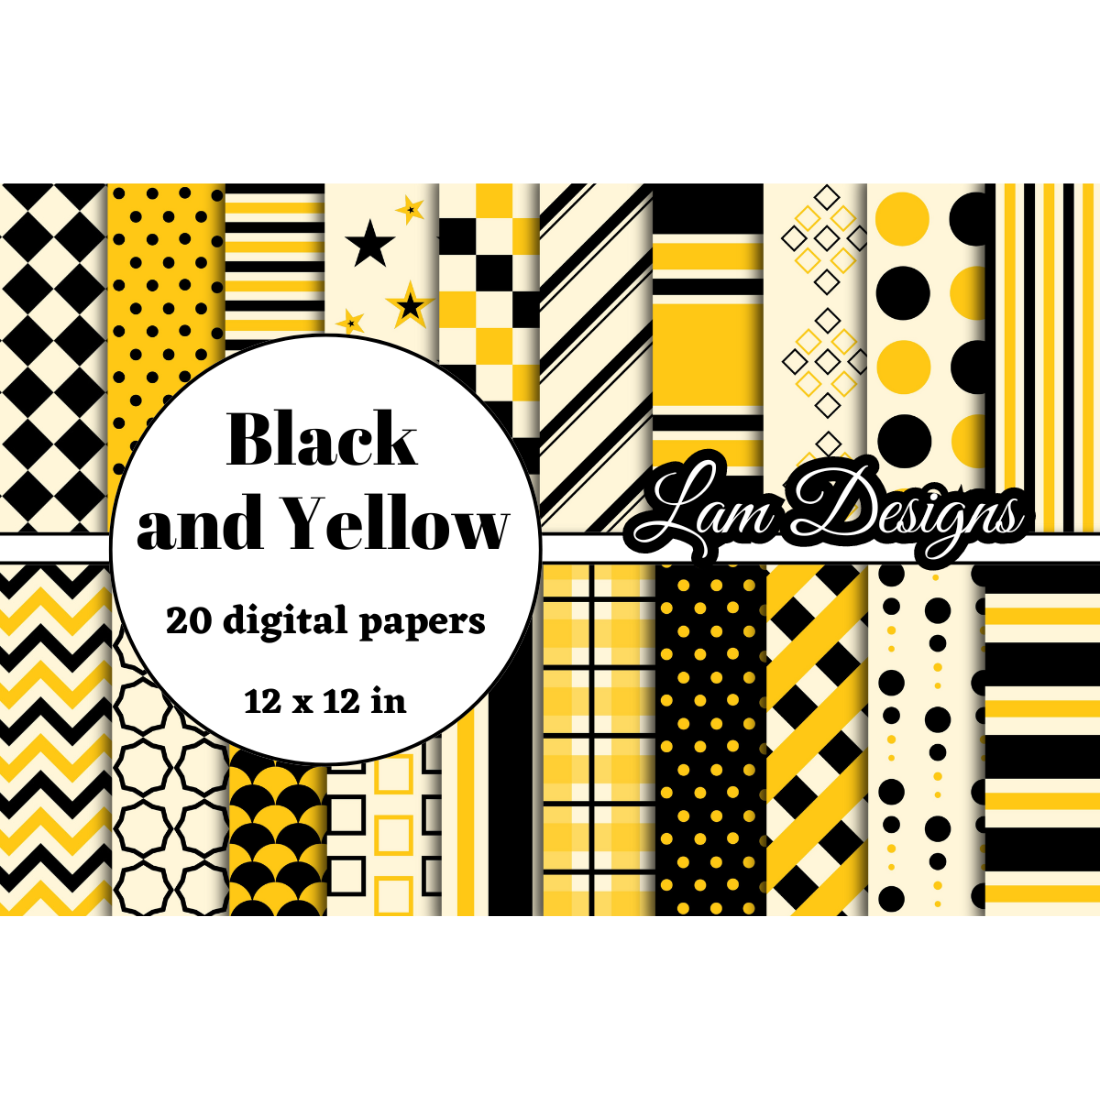 black and yellow digital papers cover image.